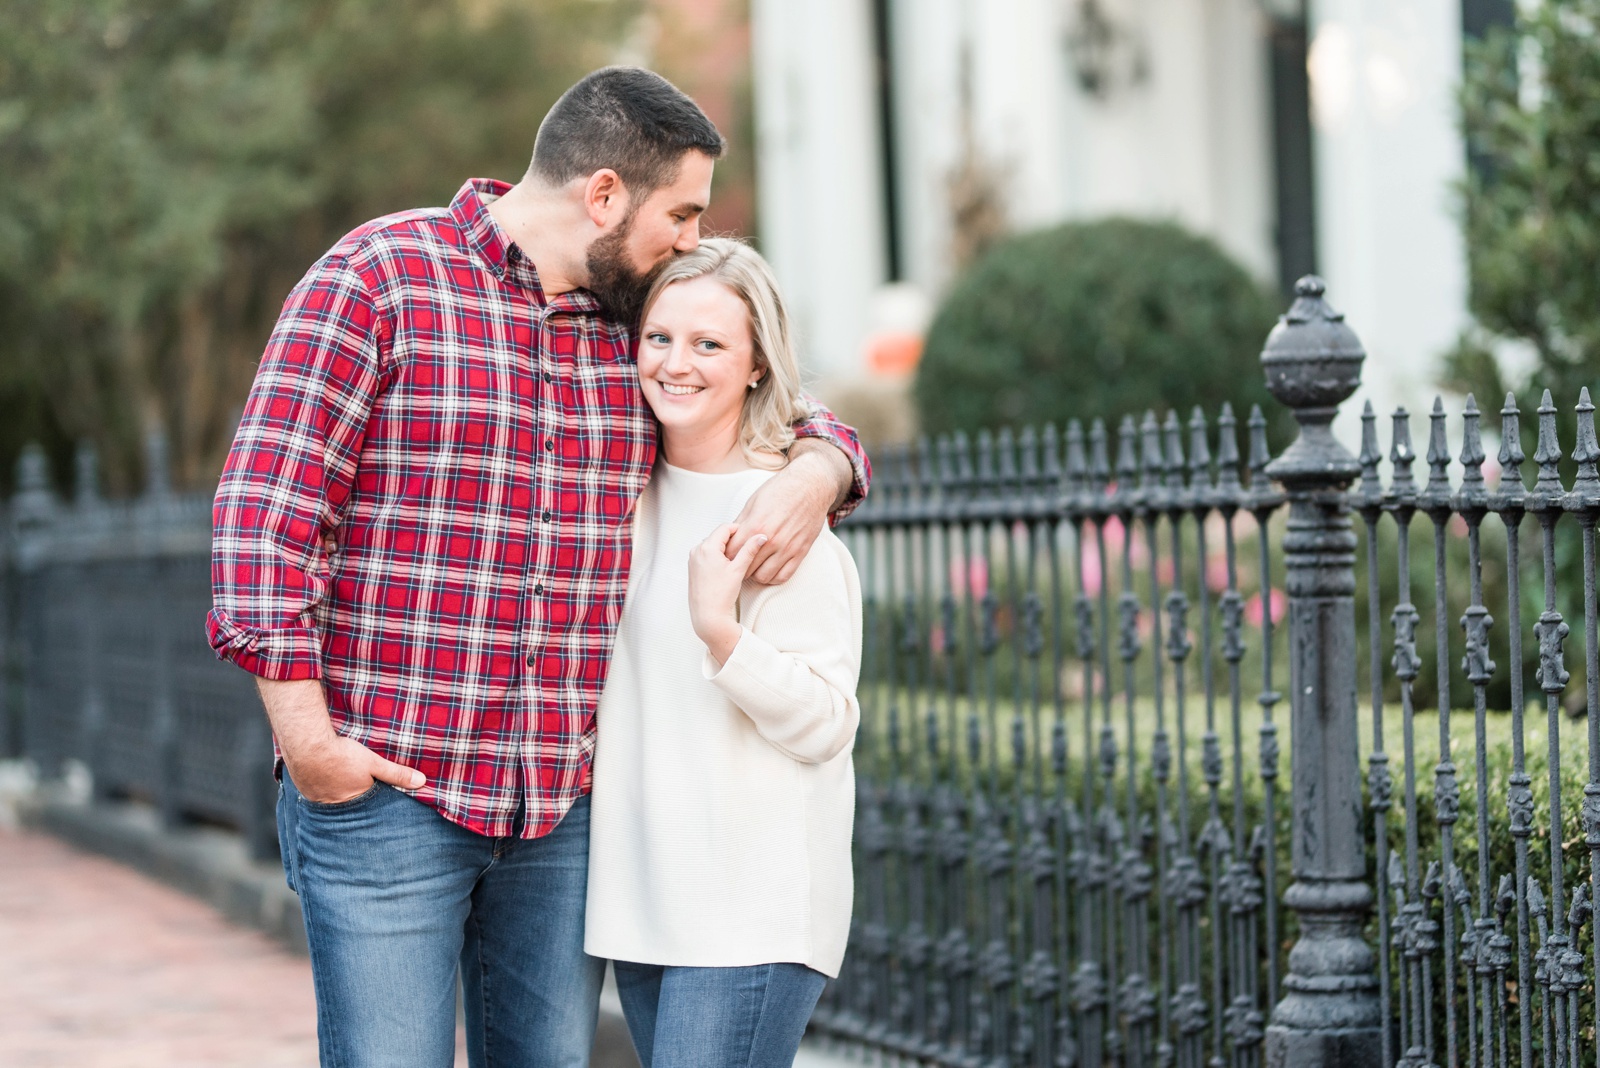 downtown-norfolk-virginia-fall-engagement-session-photo_2312.jpg